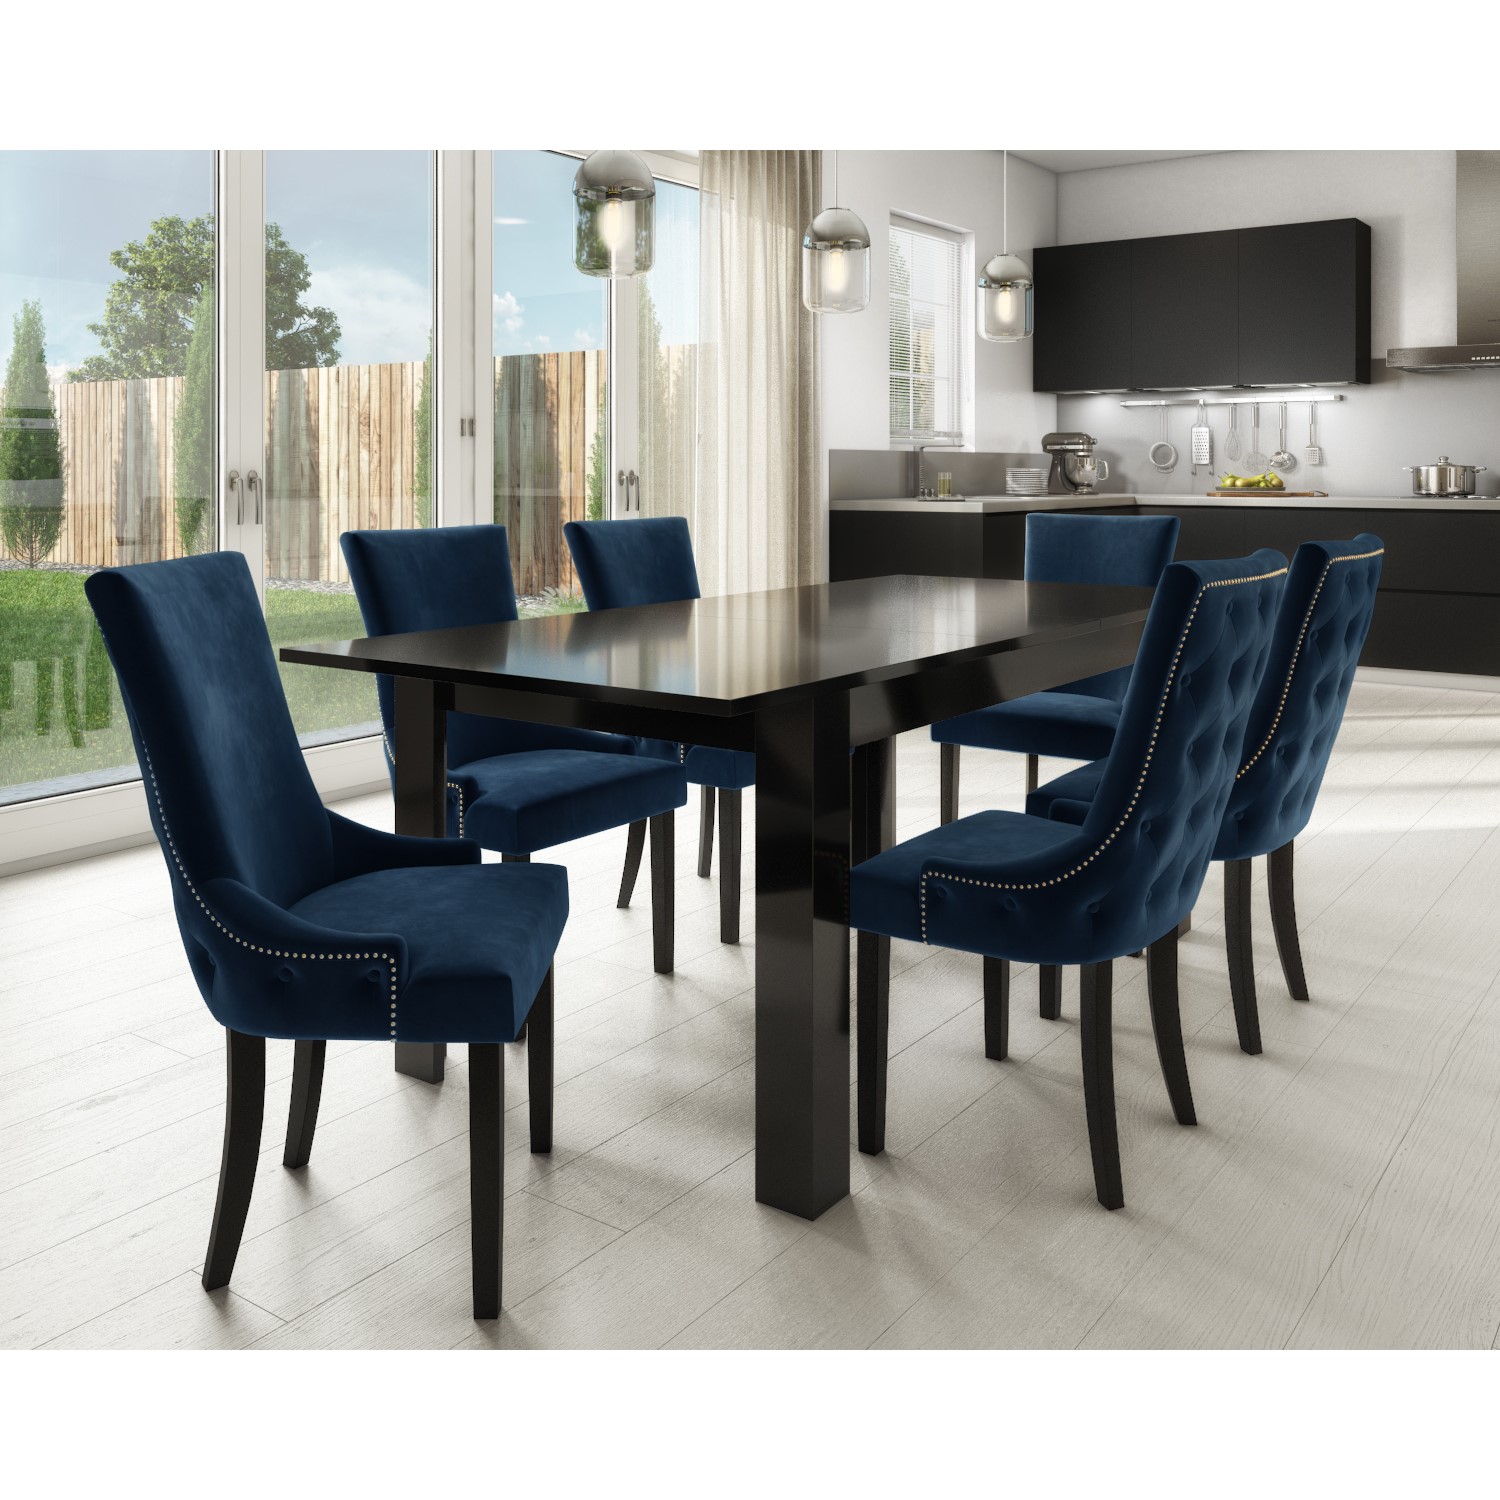 Black High Gloss Extending Dining Table With 6 Navy Blue Velvet Dining Chairs Furniture123